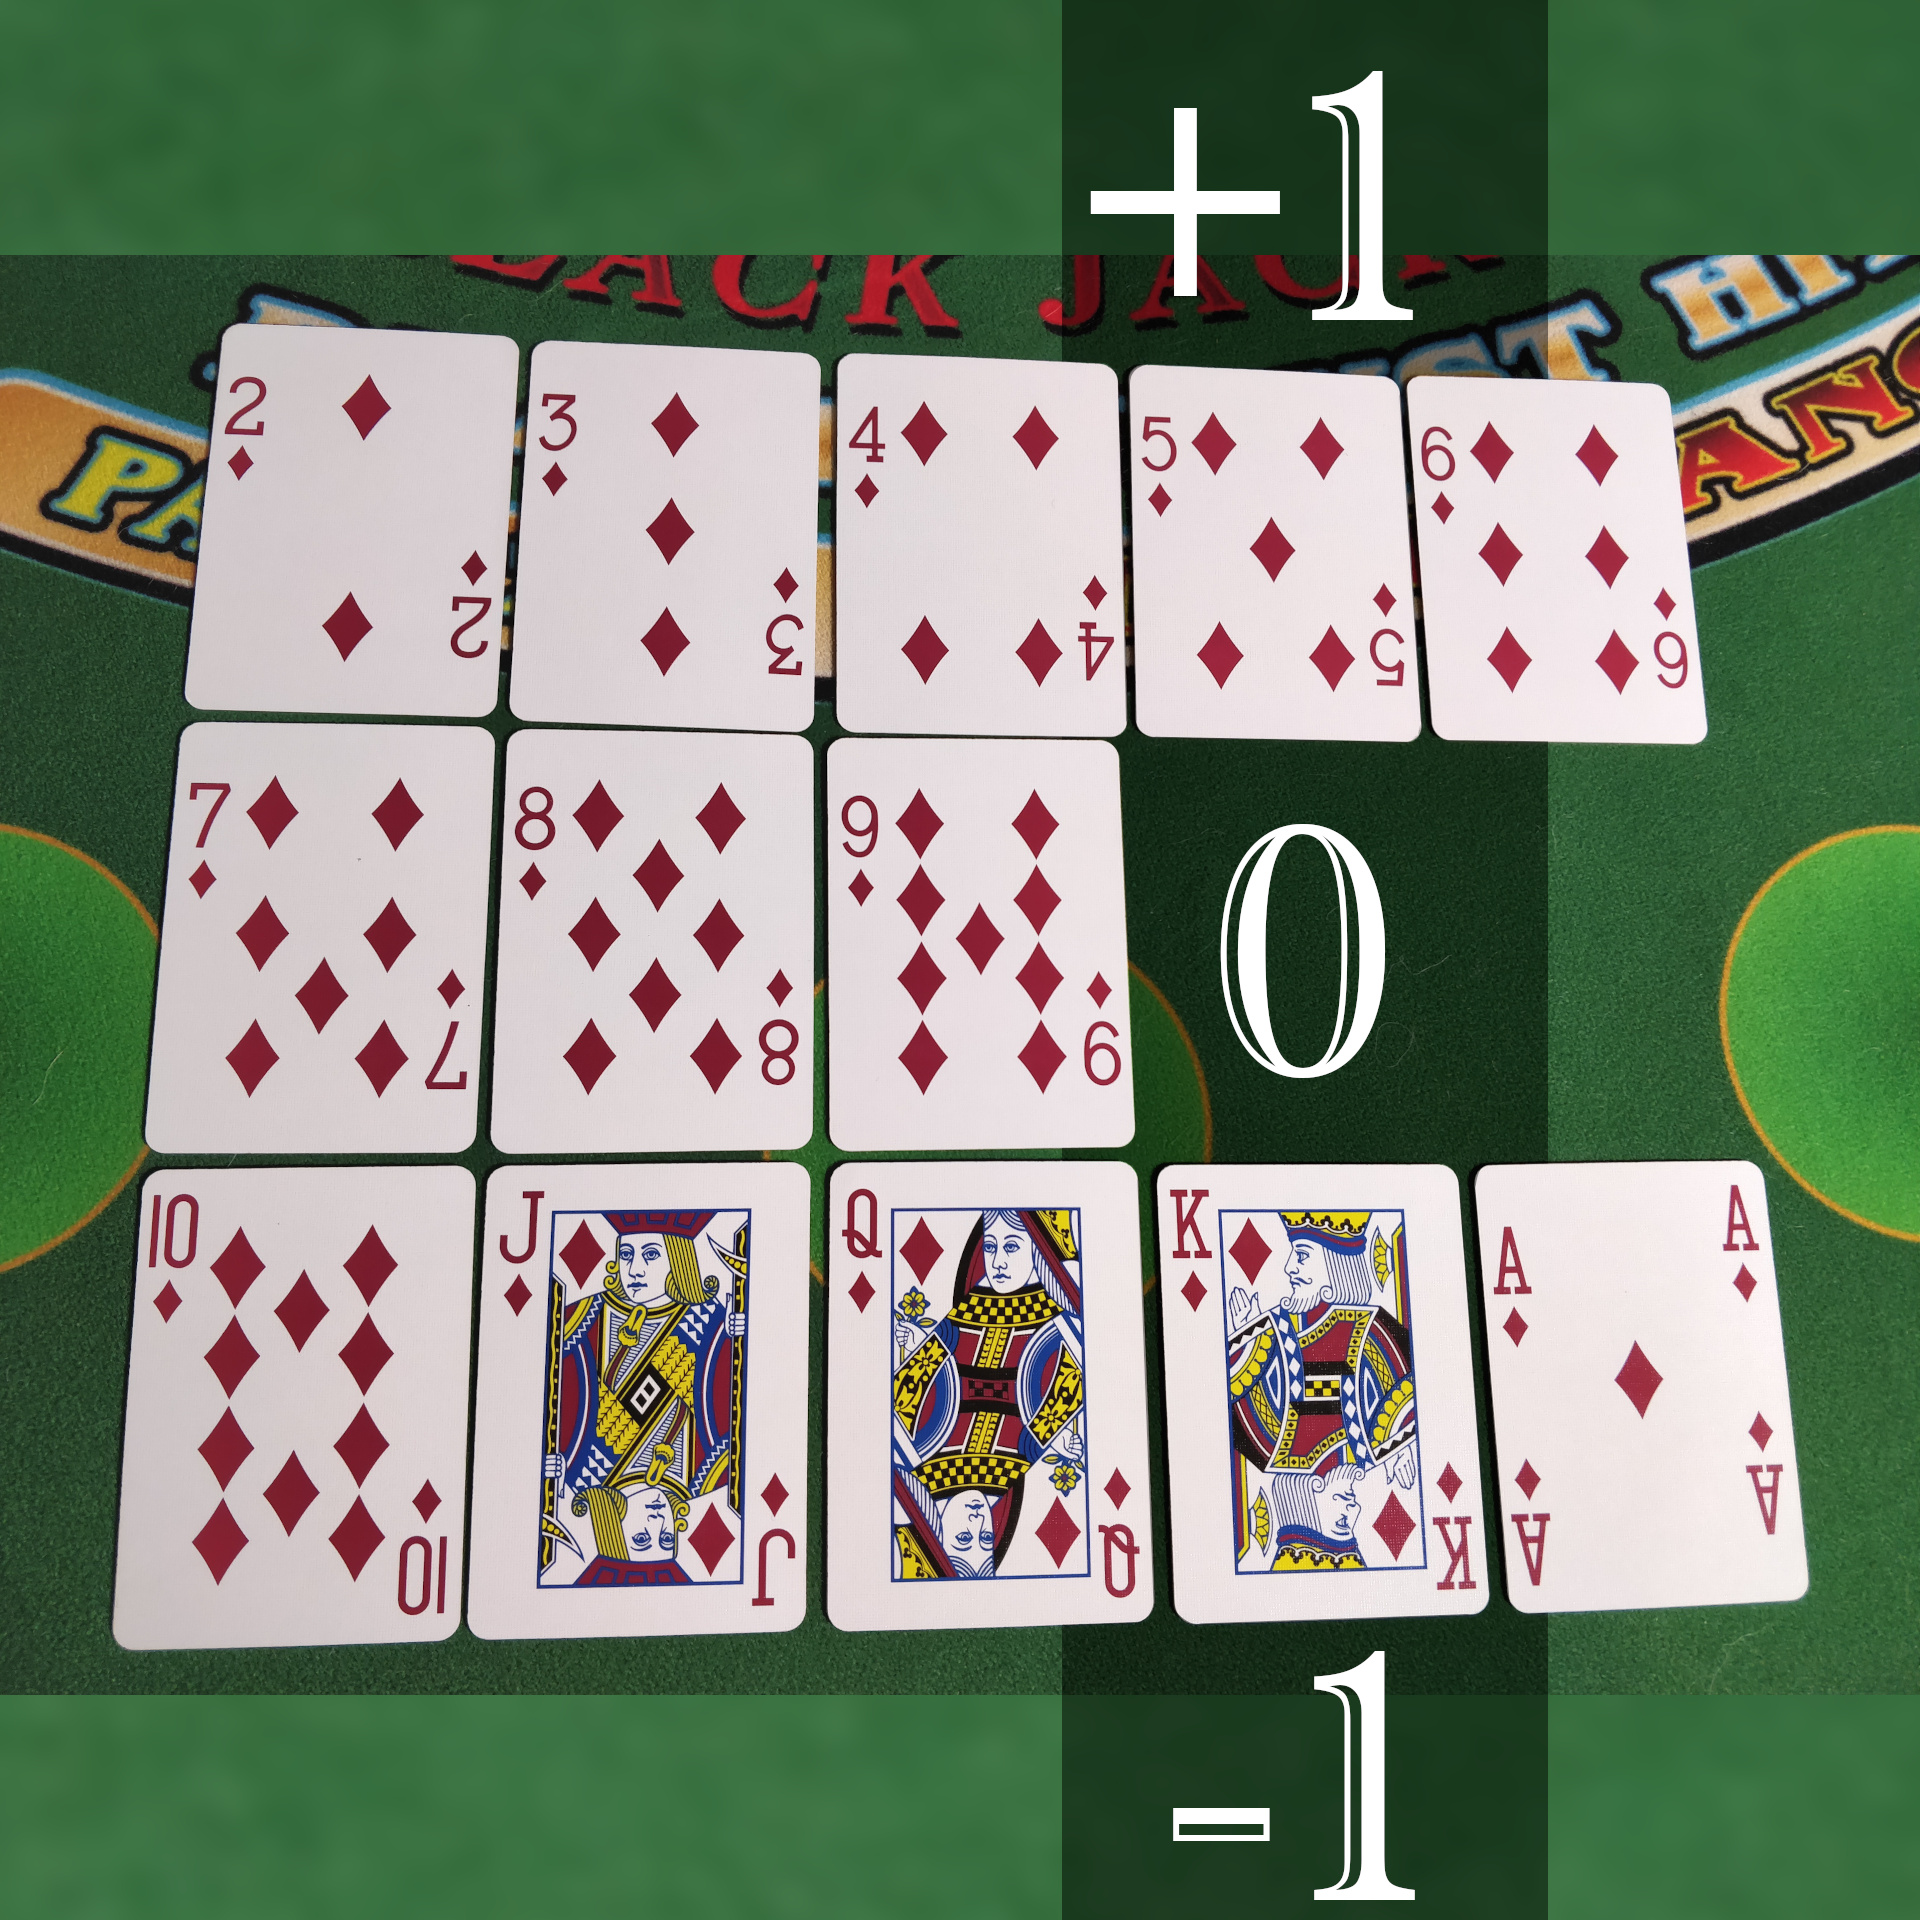 How to Count Cards in Blackjack - Blackjack Card Counting Tutorial